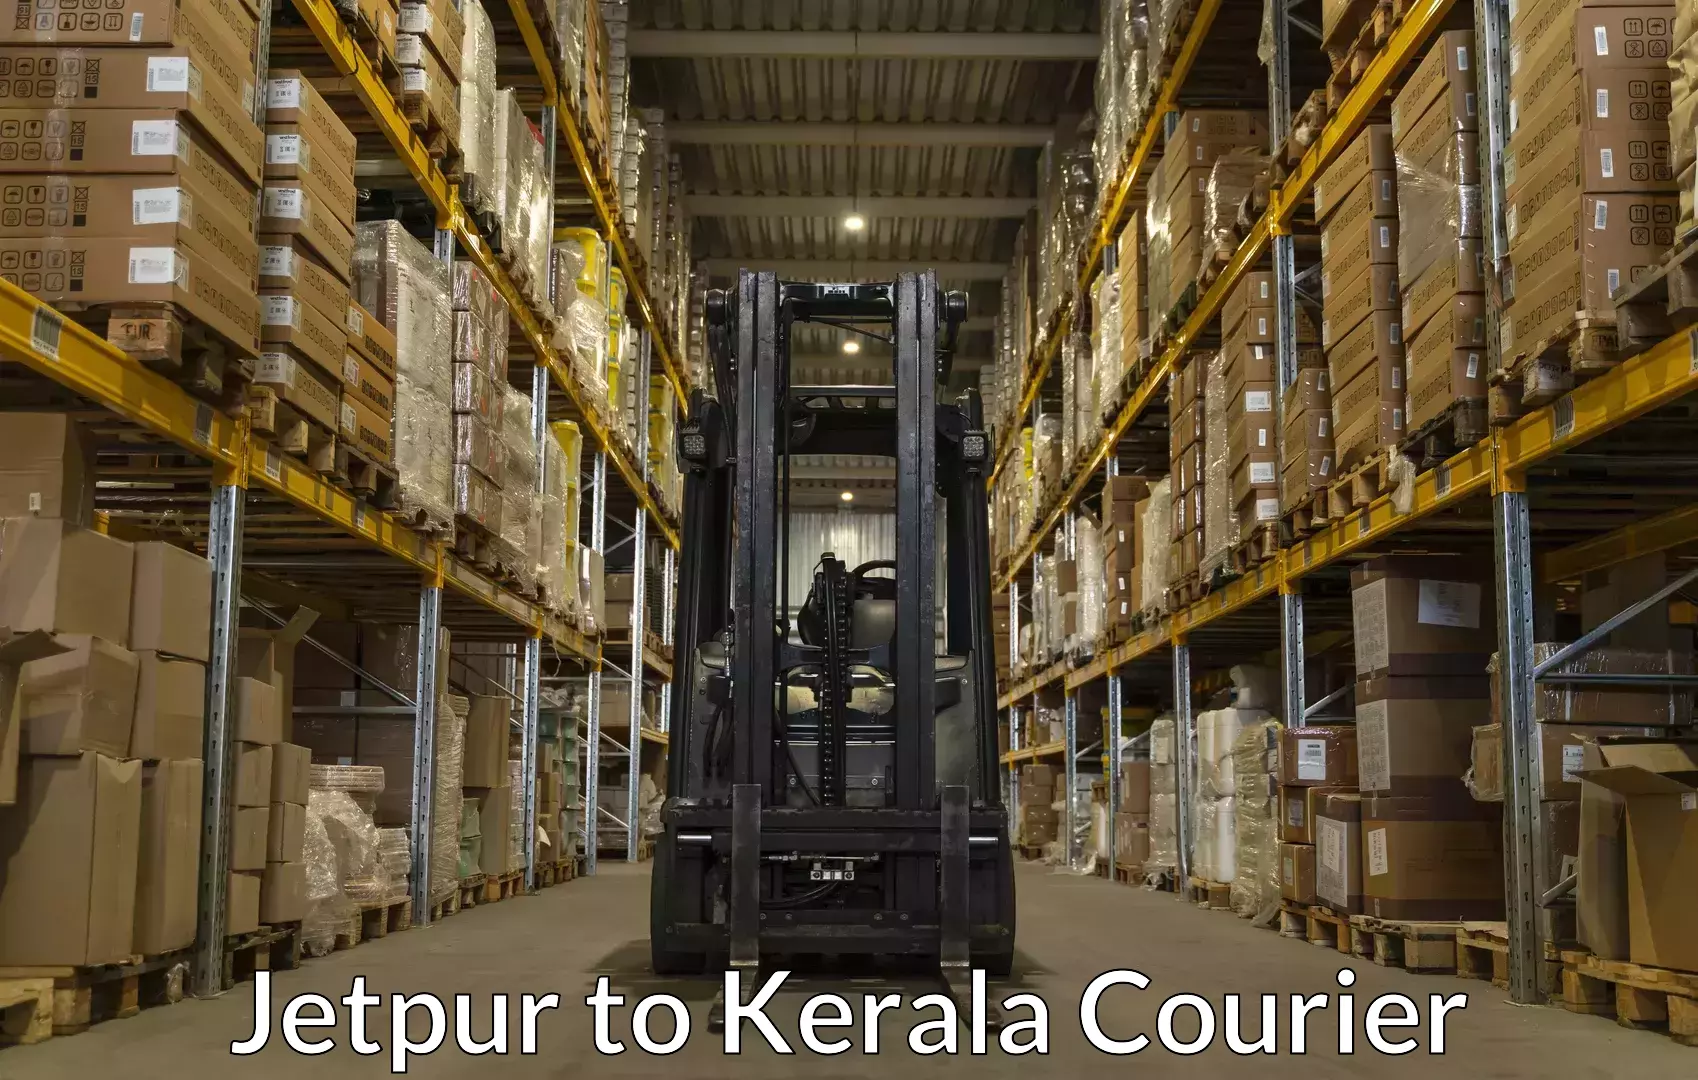 Luggage transport consulting Jetpur to Kerala